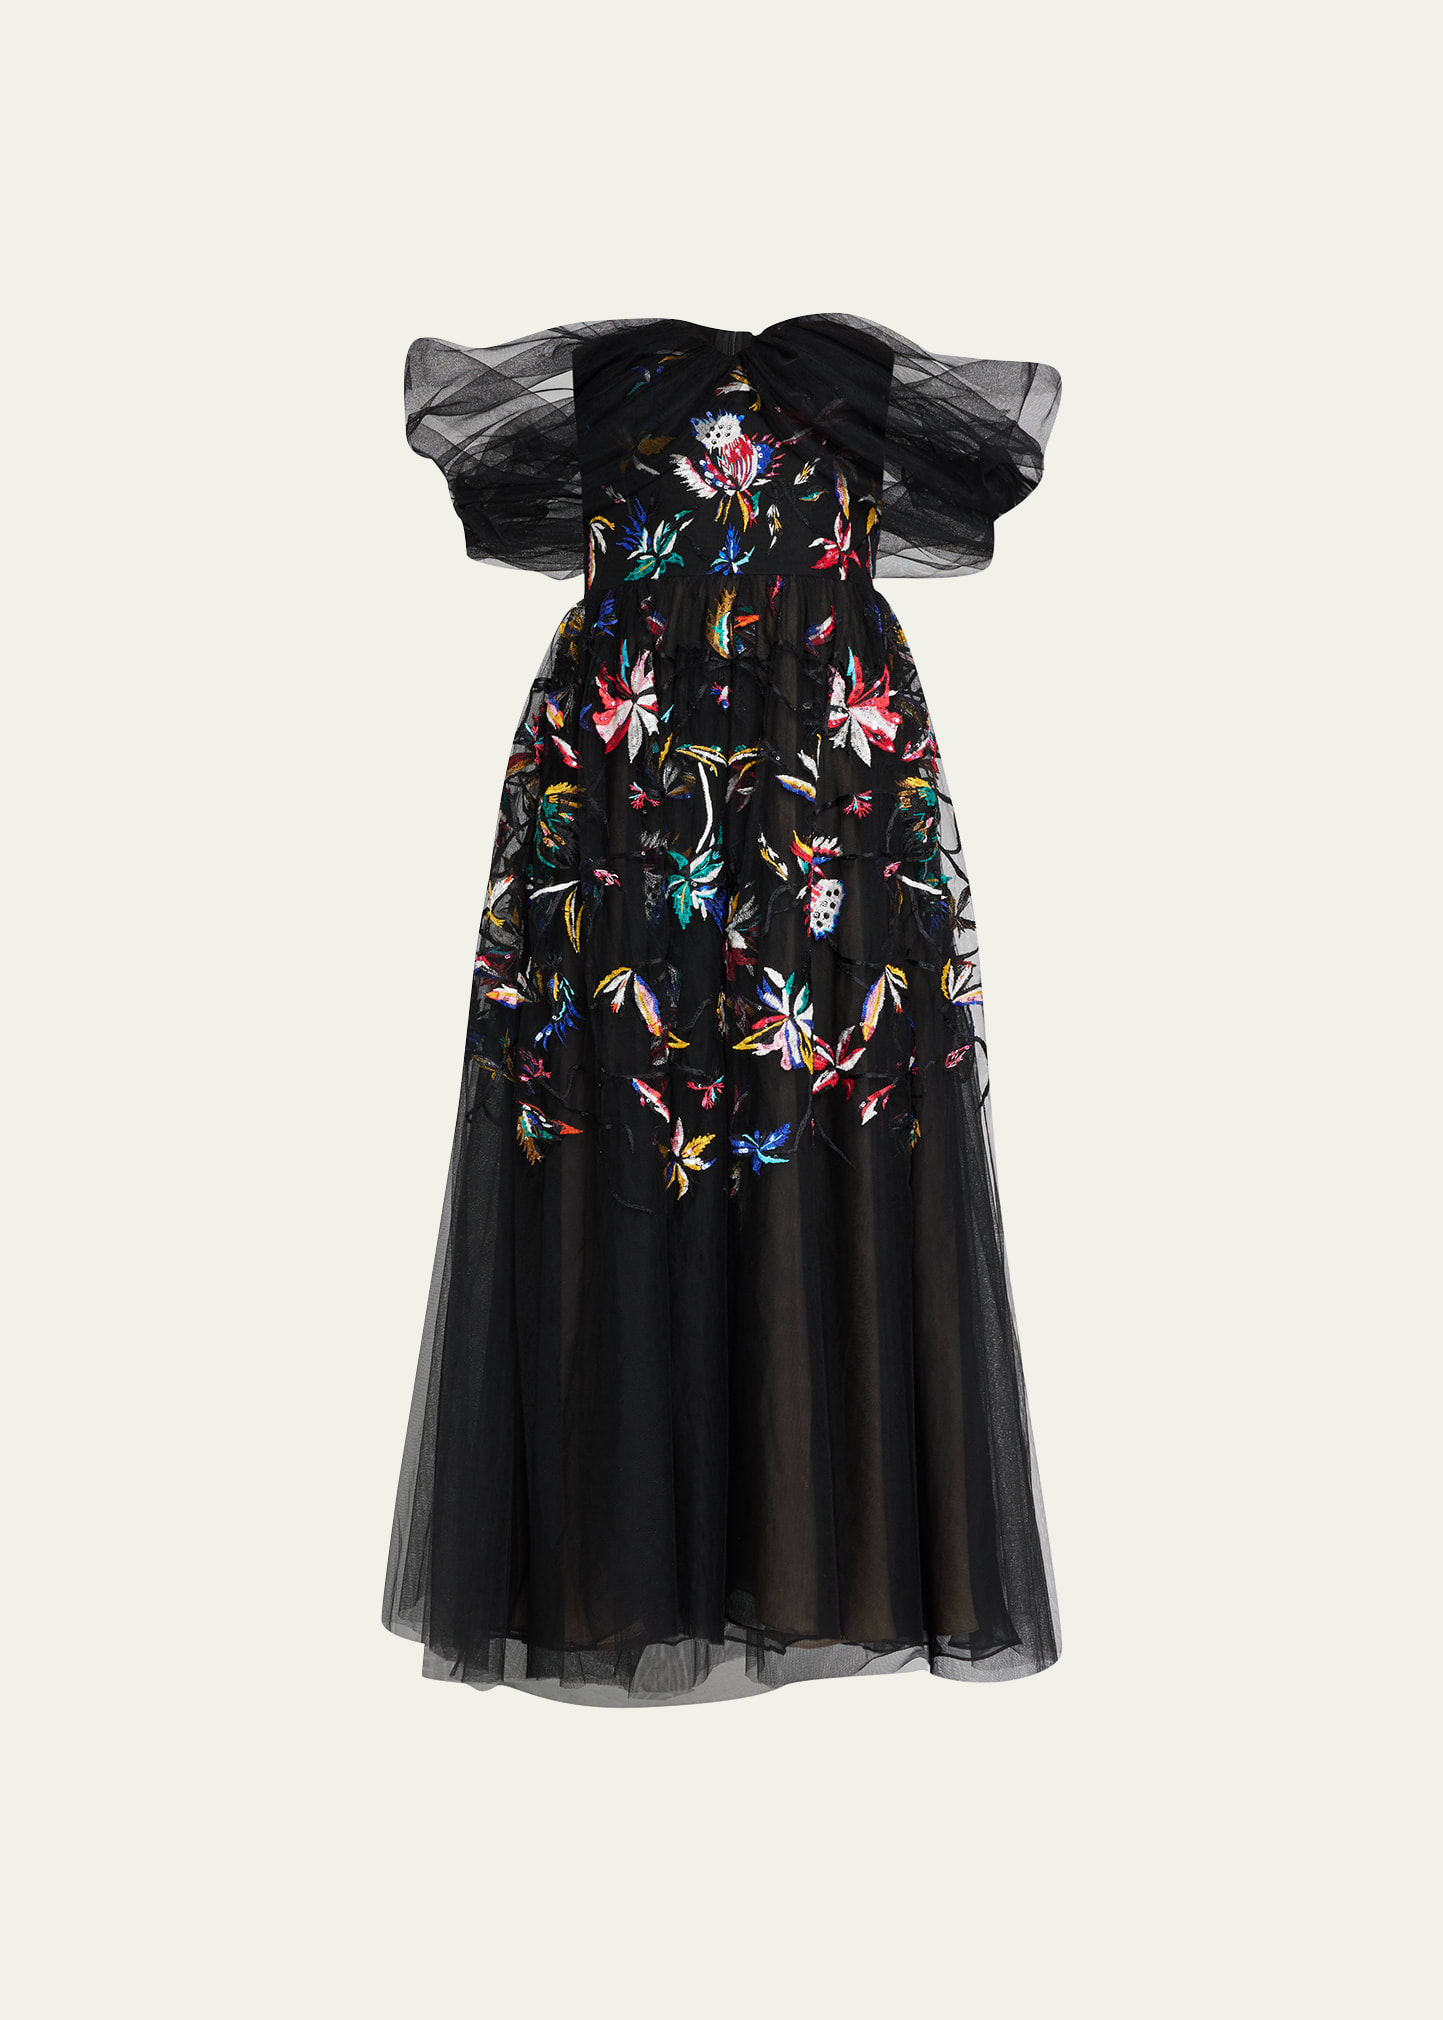 Jason Wu Collection Tulle Off-Shoulder Cocktail Dress with Embroidered Floral Details